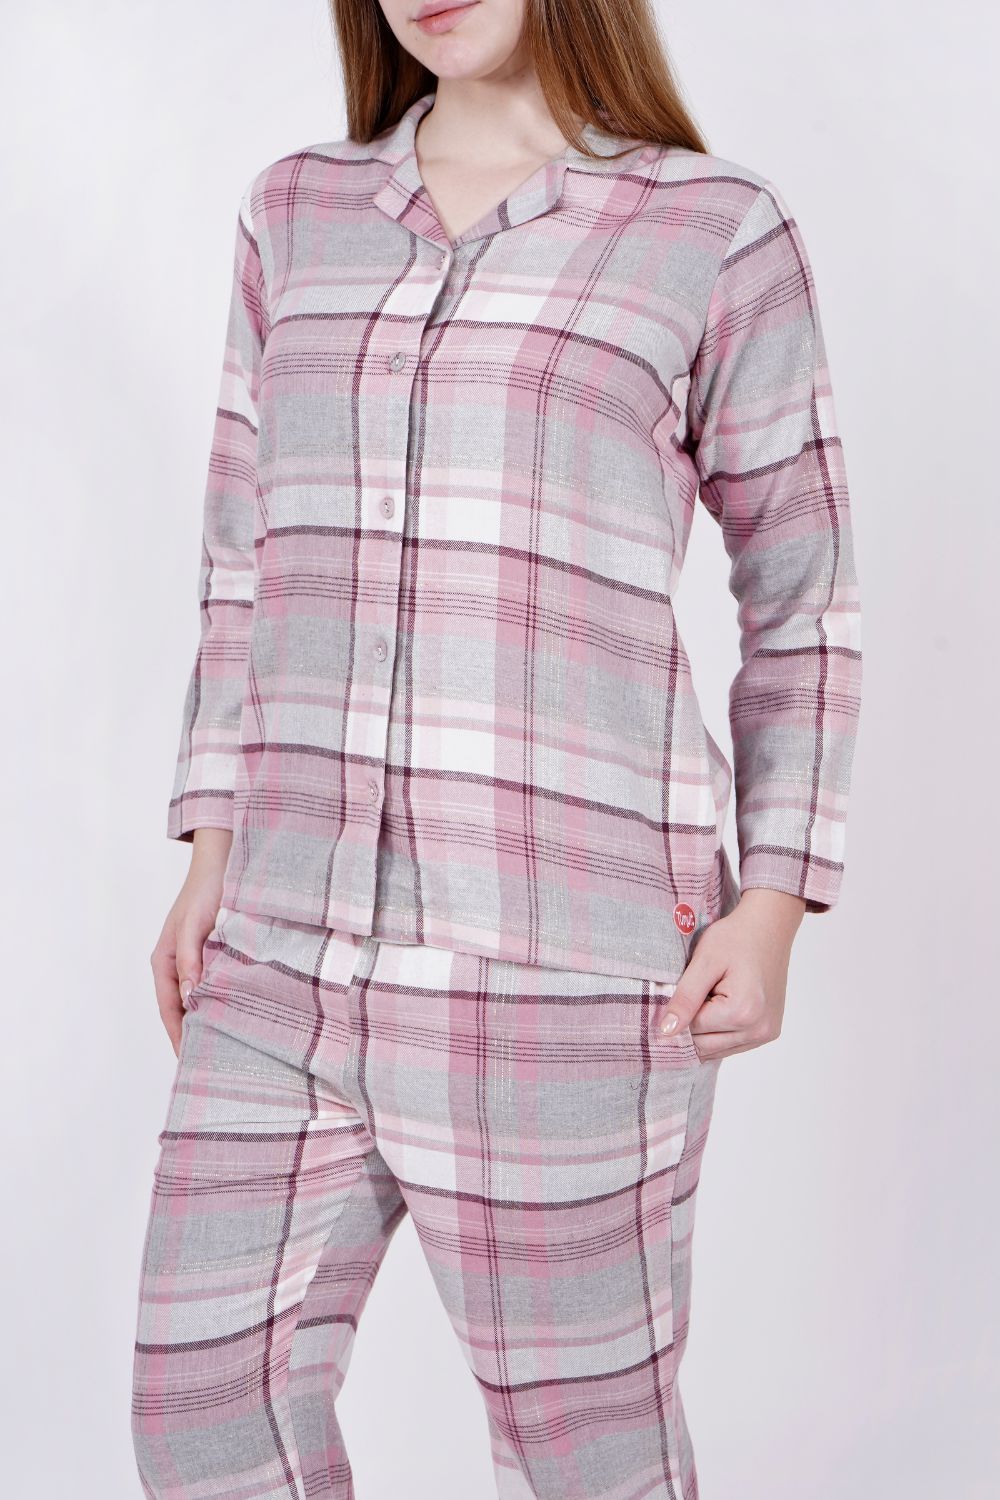 Check In On You Nightwear Set